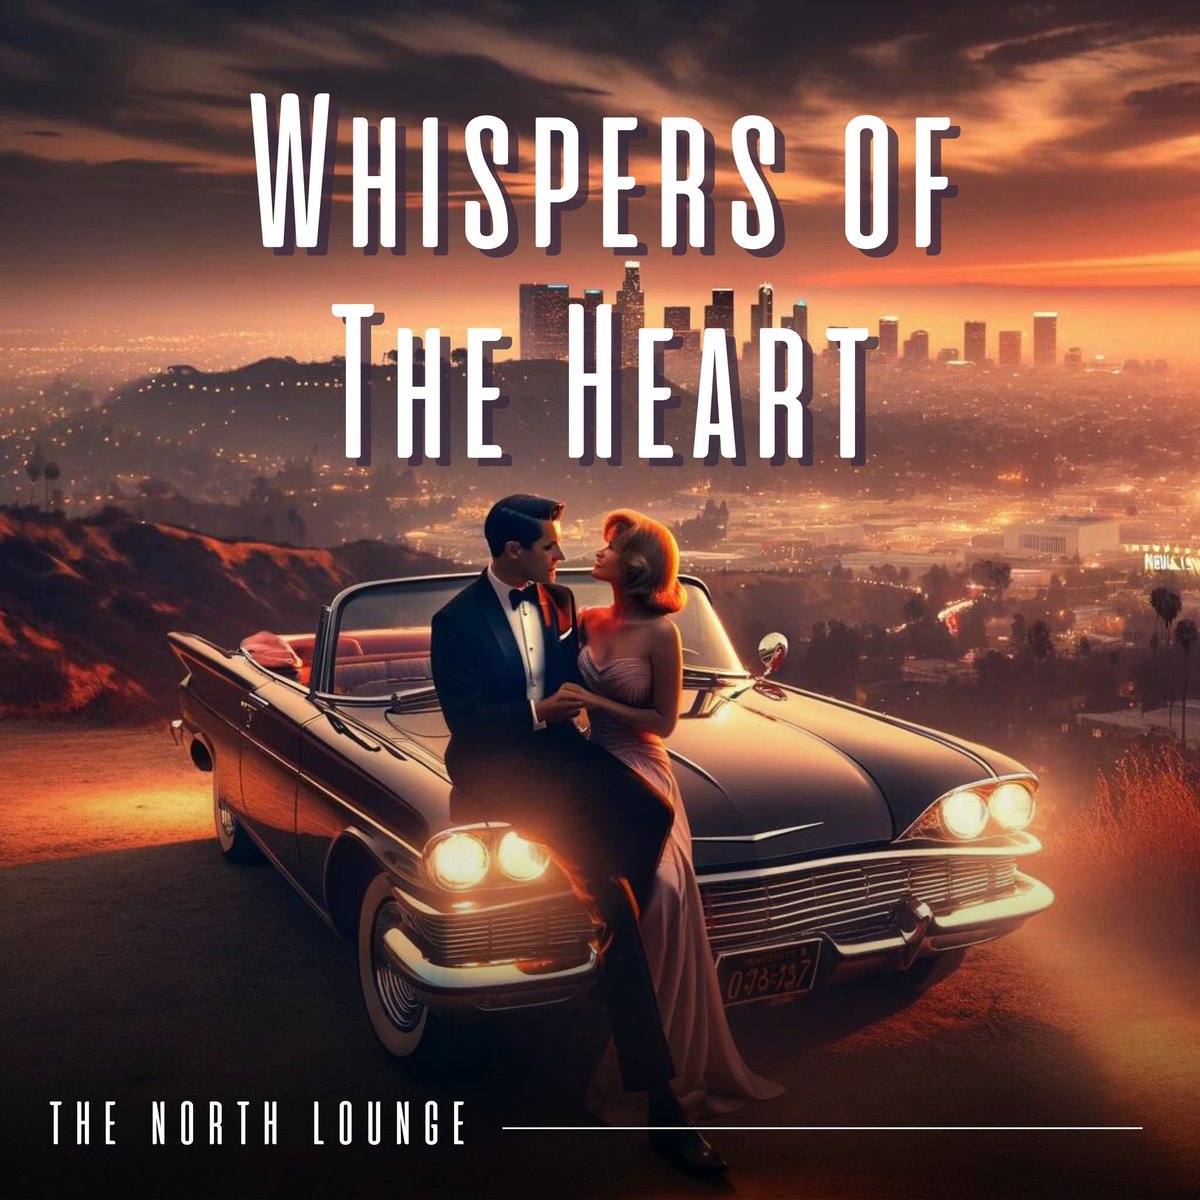 WHISPERS OF THE HEART by @thenorthloungemusic 
A special romantic theme from 'The Film Noir Project' that takes listeners on a nostalgic journey back to the romantic essence of 1960s Hollywood.
Soon available on all digital platforms.
#WhispersOfTheHeart #CinematicMusic